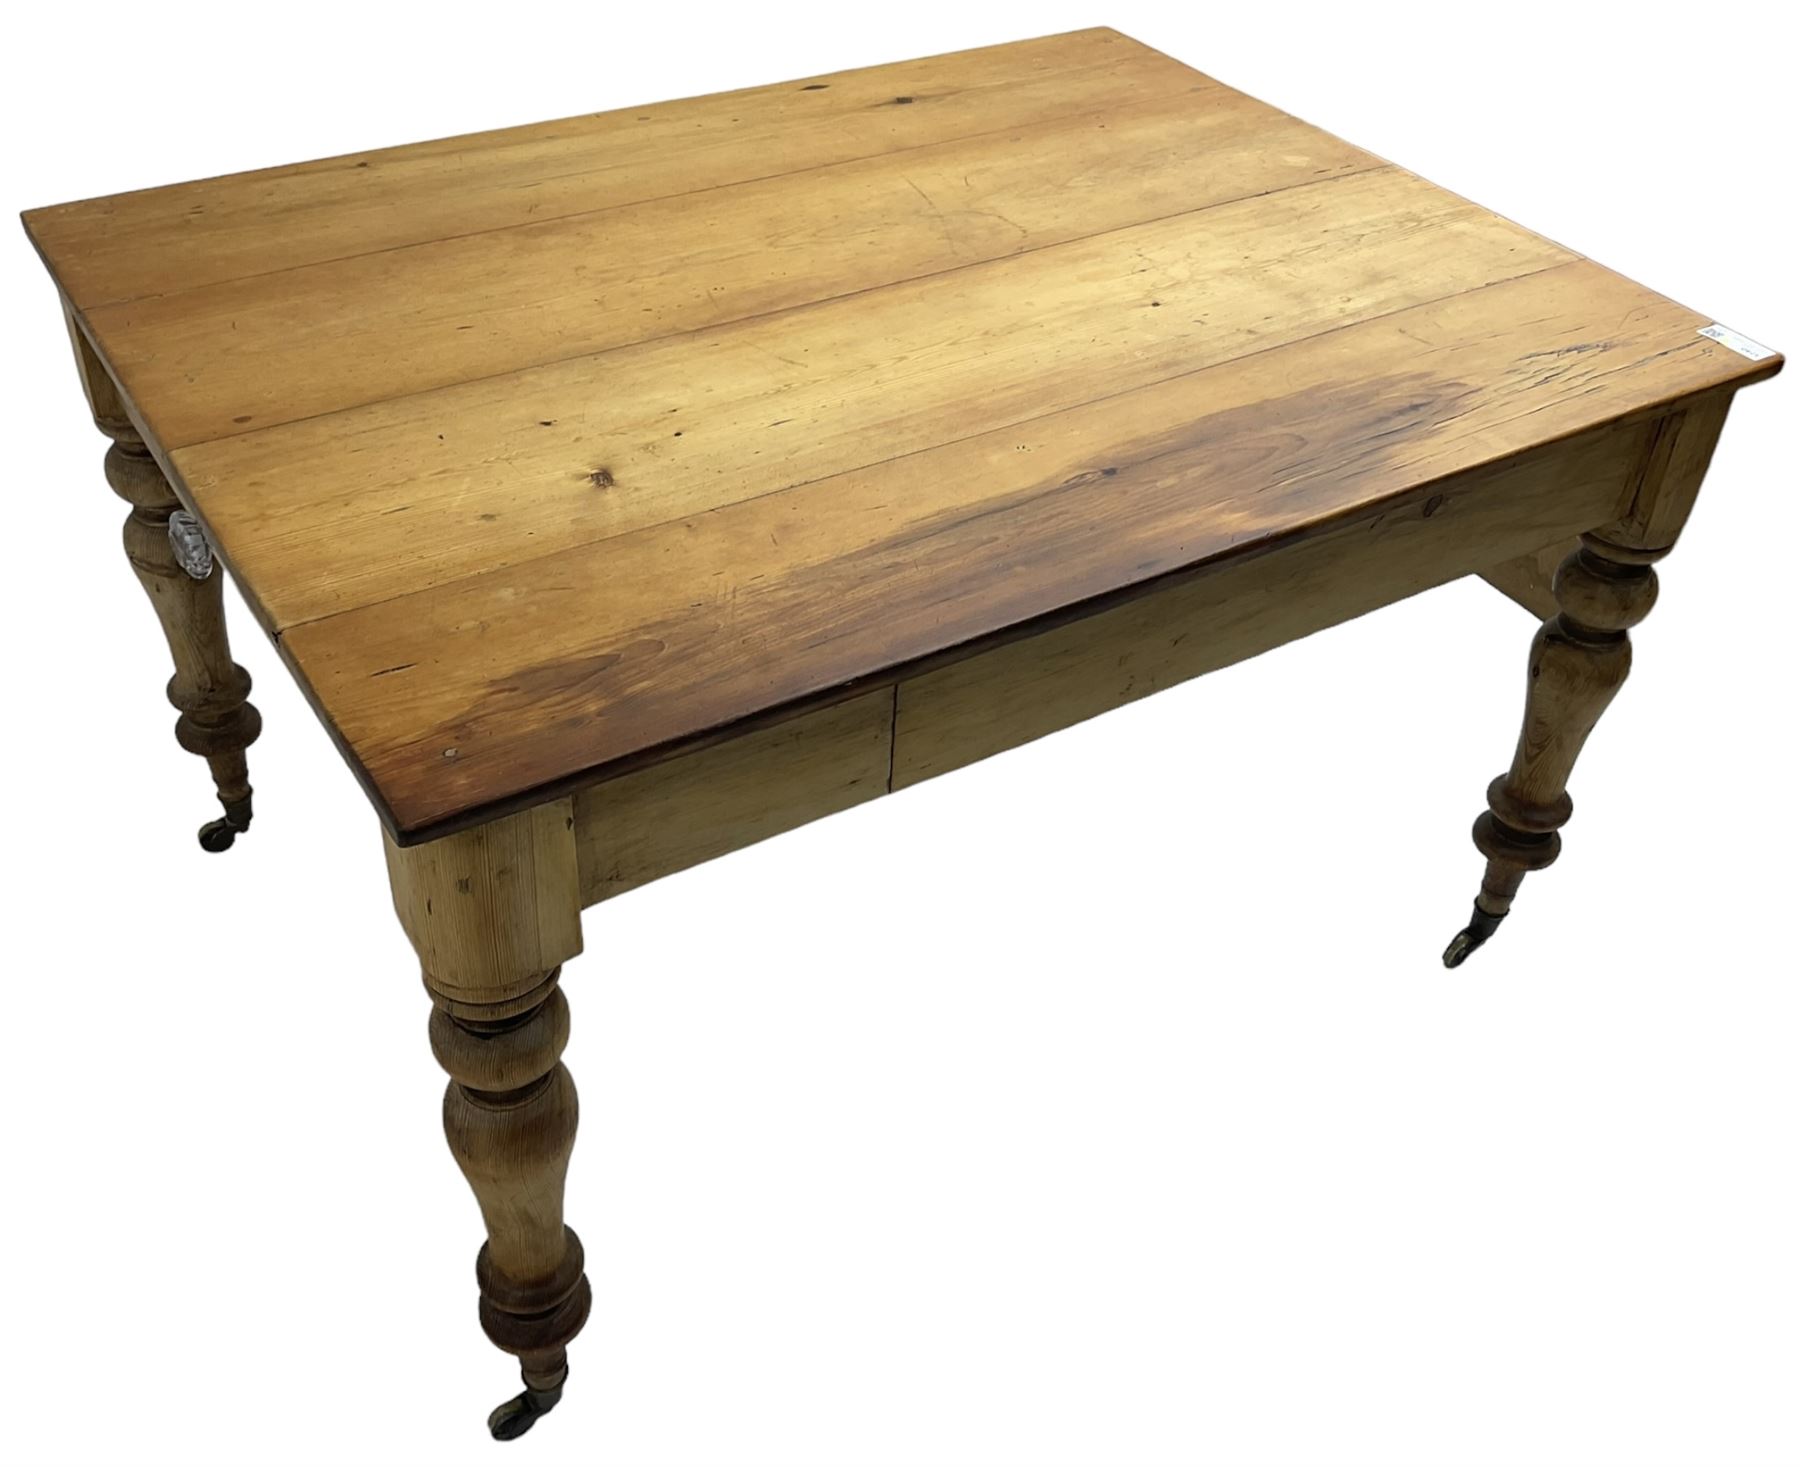 Victorian pine farmhouse kitchen dining table - Image 7 of 8